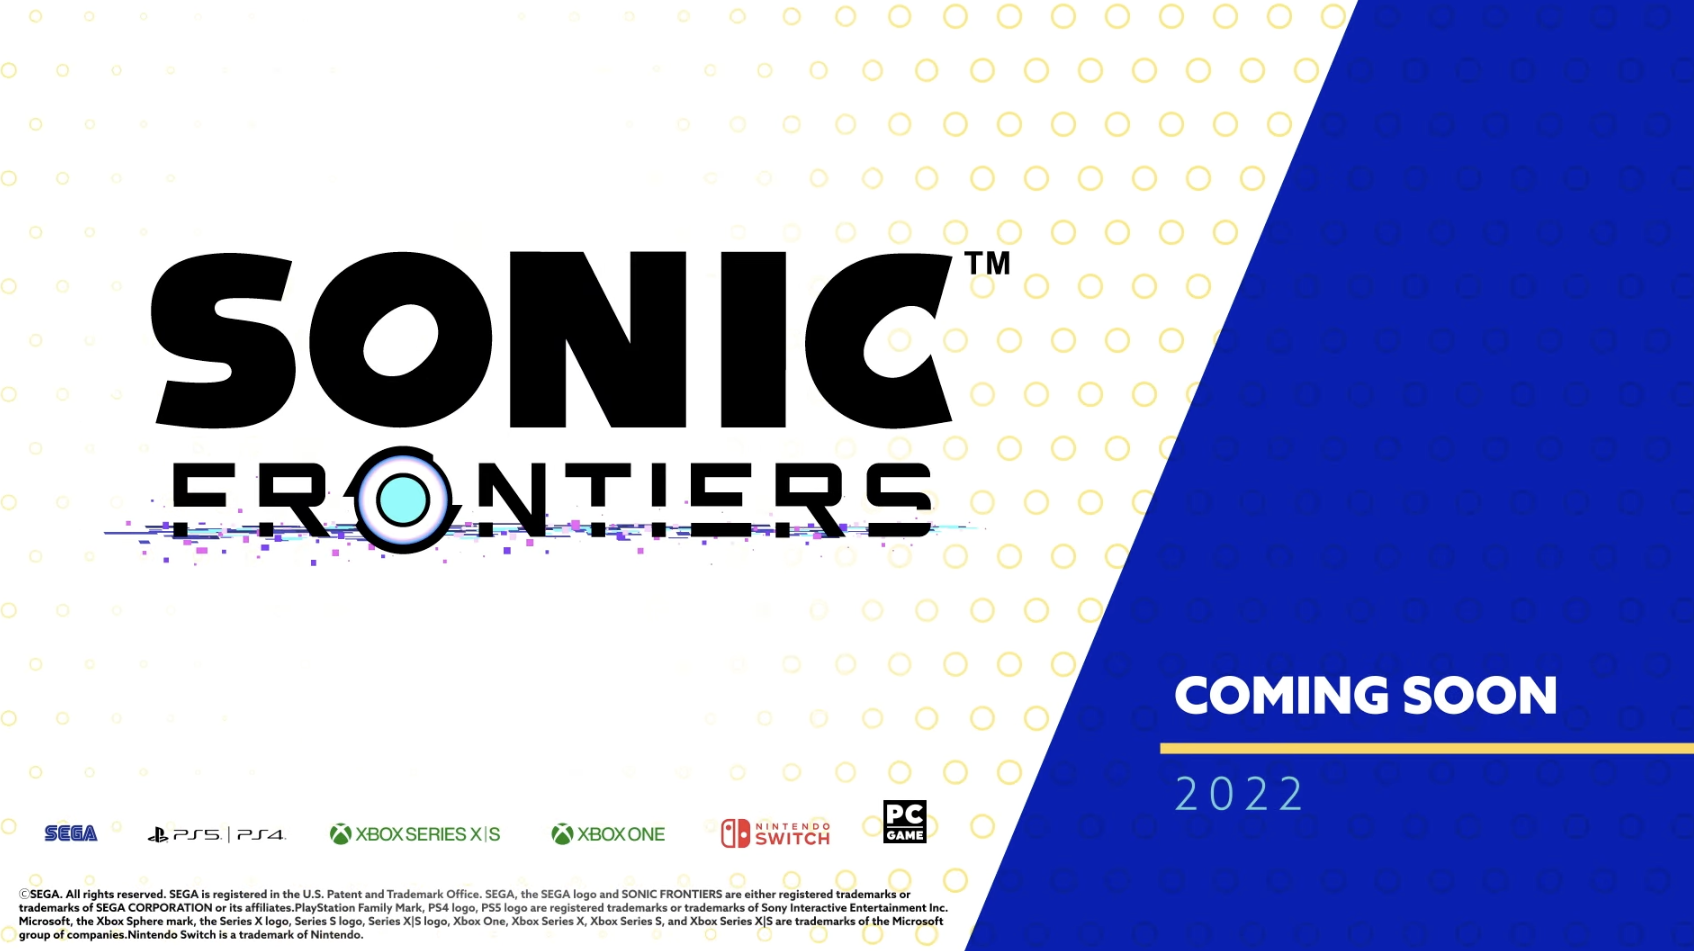 Sonic Frontiers: World Premiere Gameplay